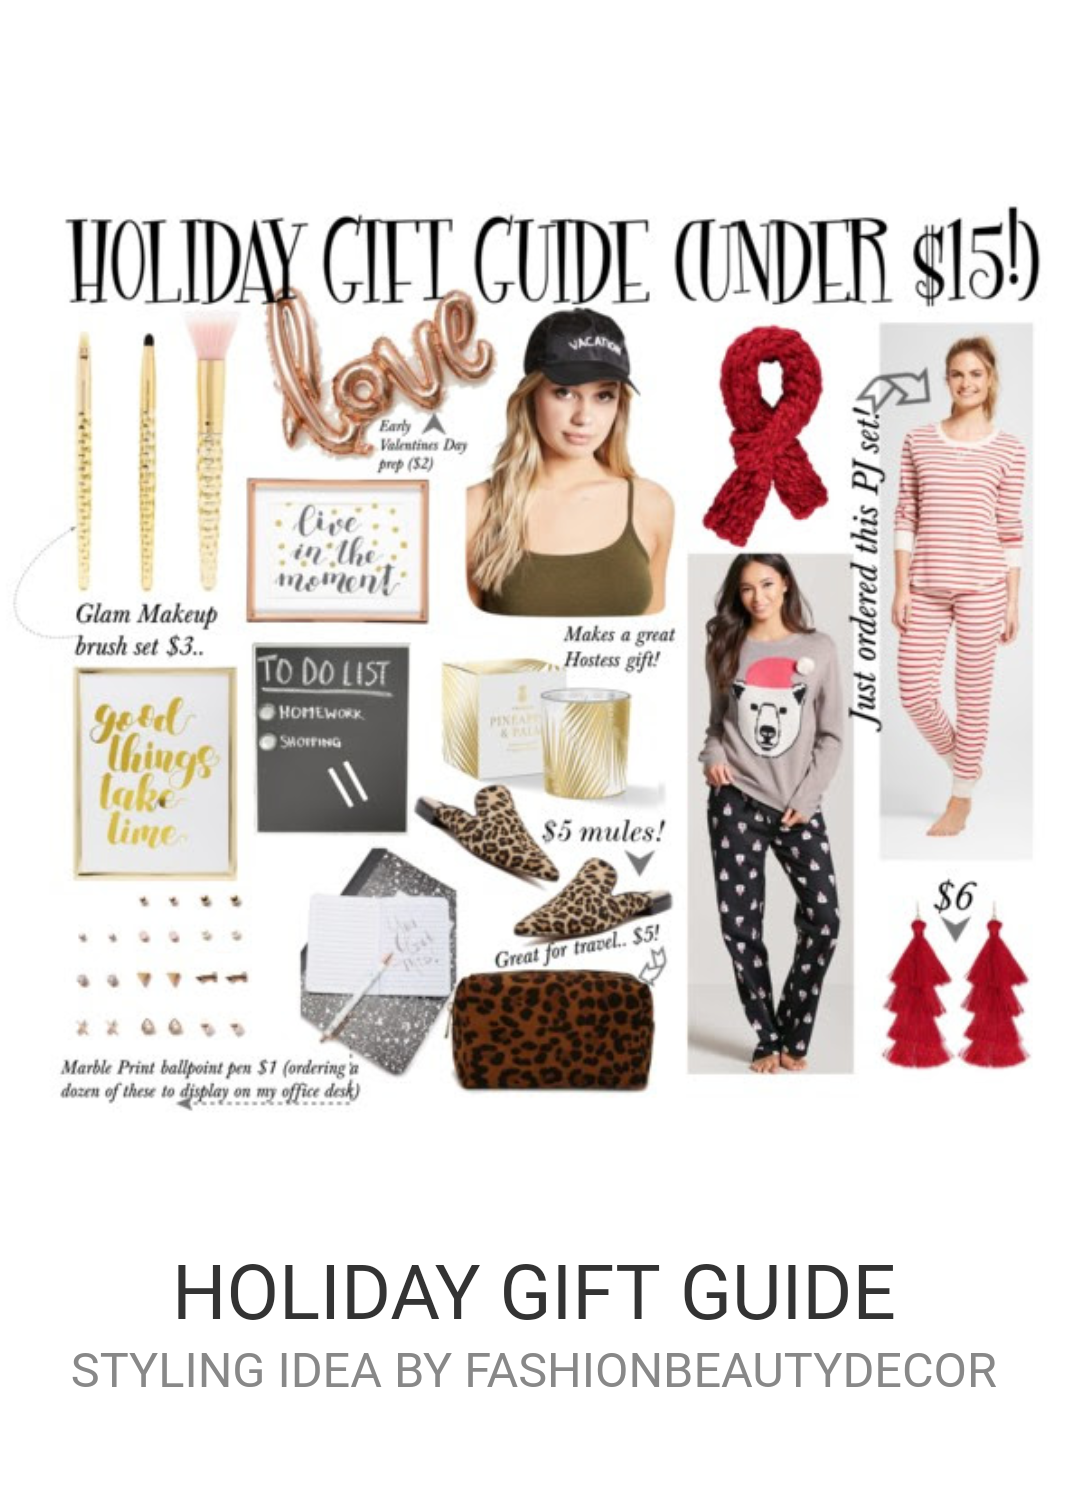 http://www.fashionbeautydecor.com/wp-content/uploads/2017/12/Holidaygiftguide.png